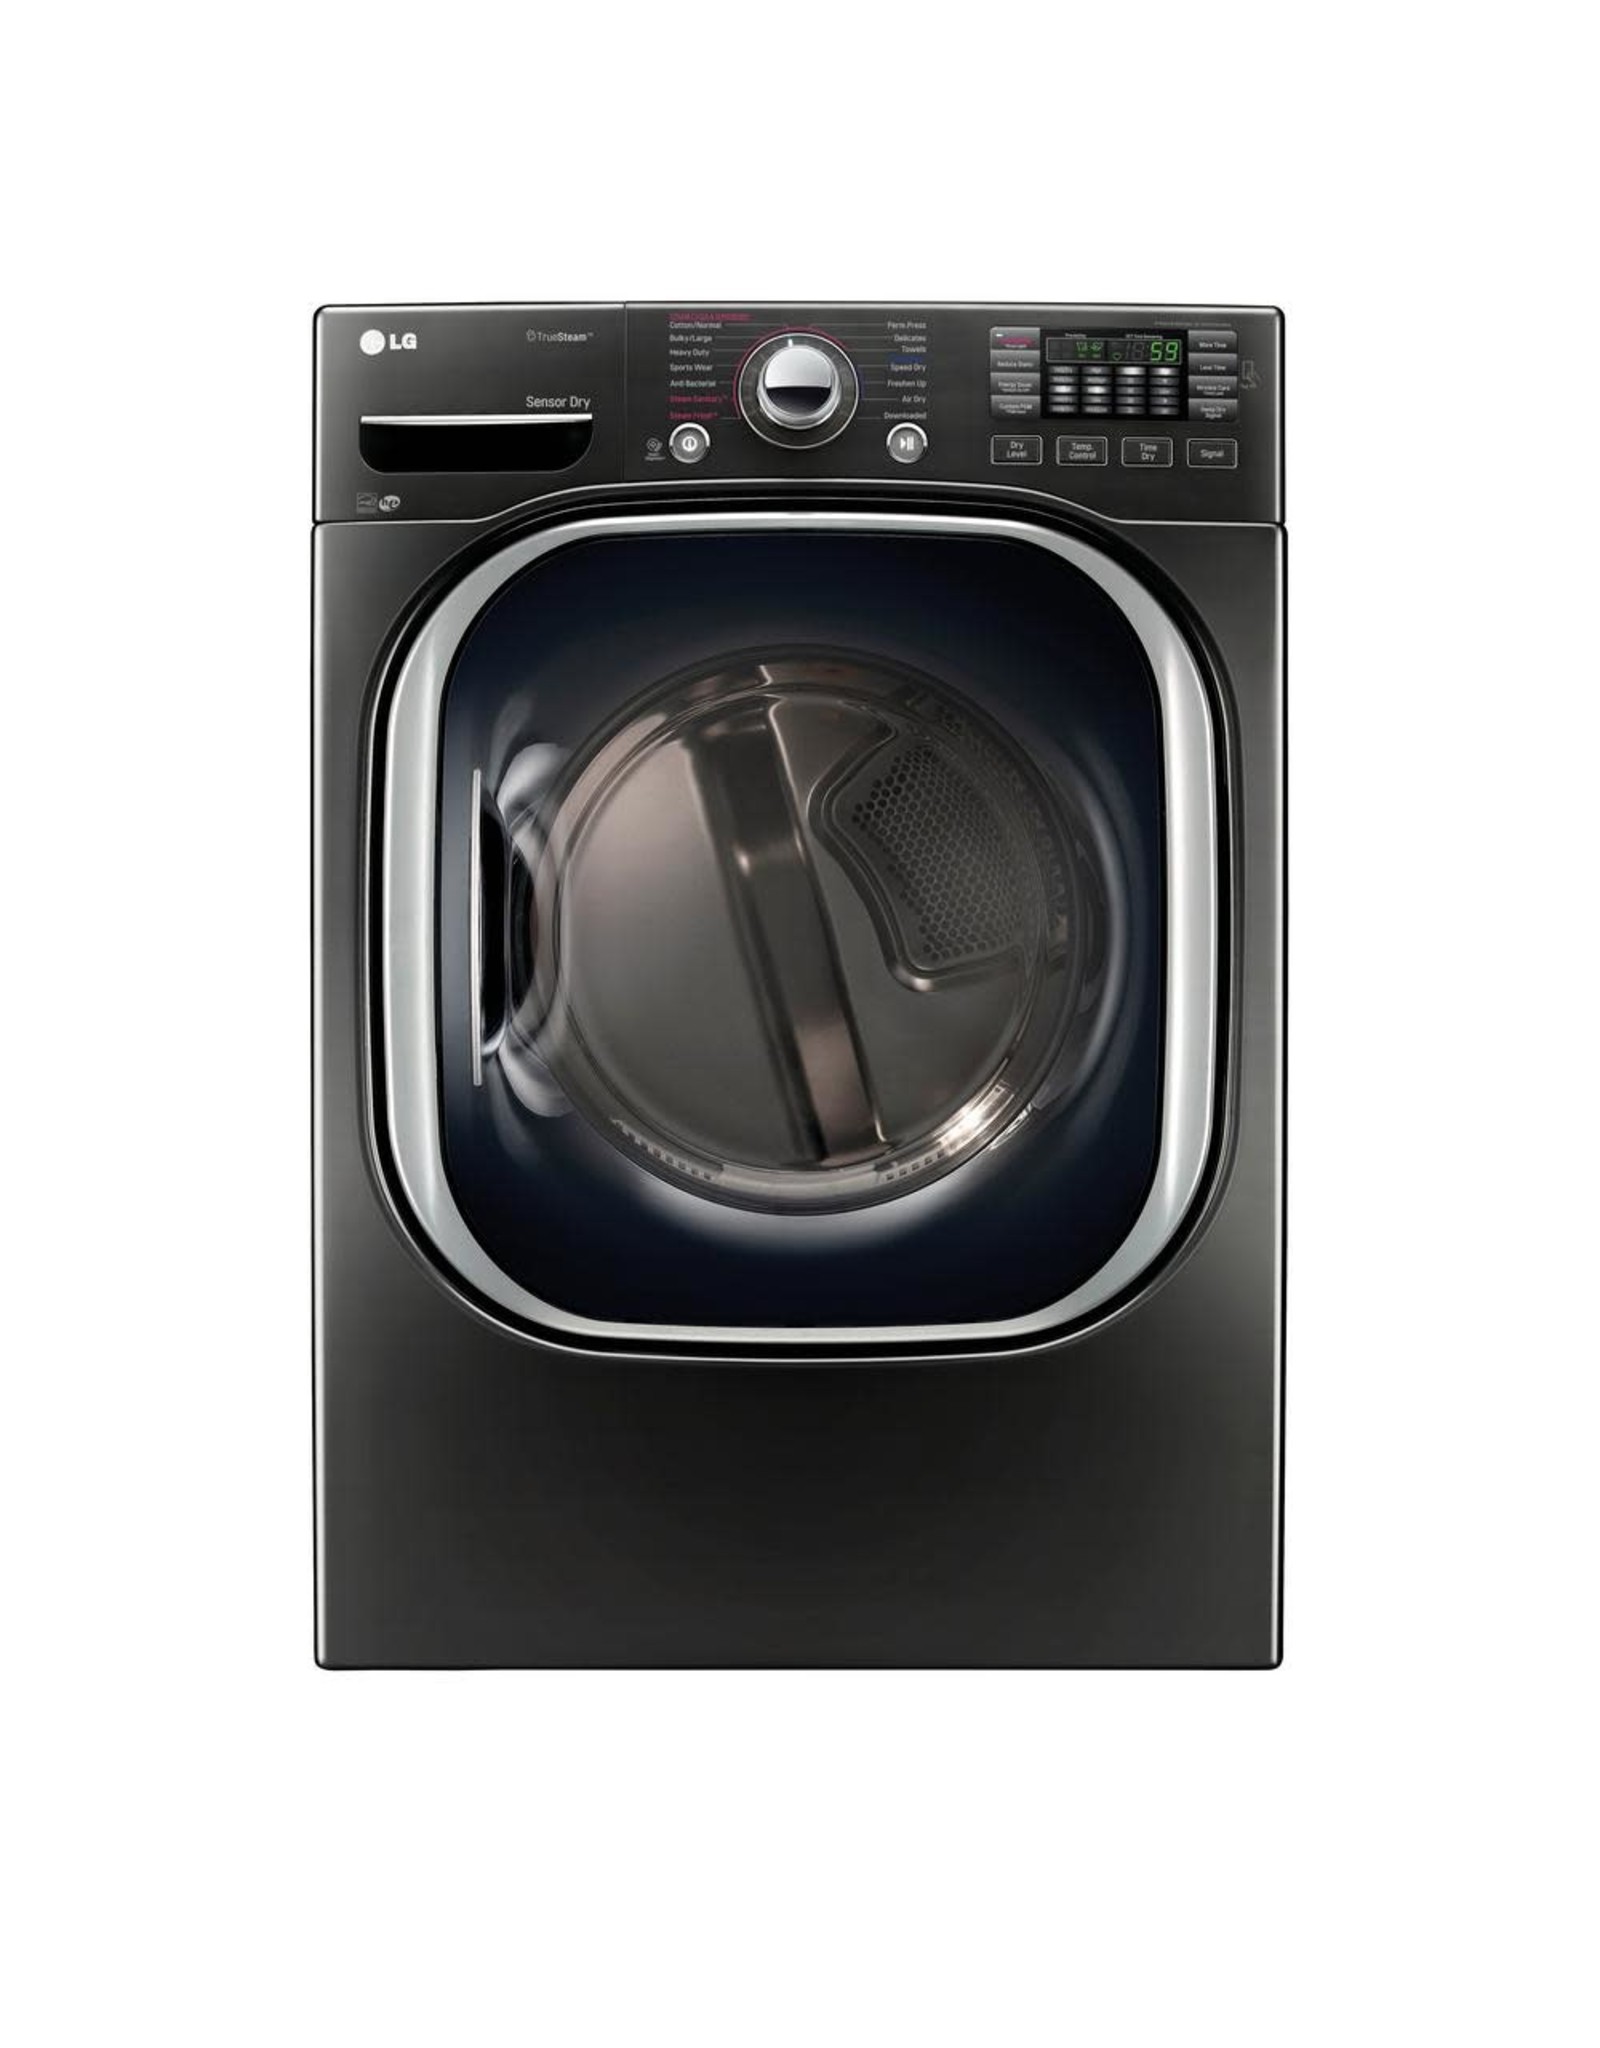 LG Electronics DLEX4370K 7.4 cu. ft. PrintProof Black Stainless Steel Stackable Front Load Electric Dryer with TurboSteam, Pedestal Compatible